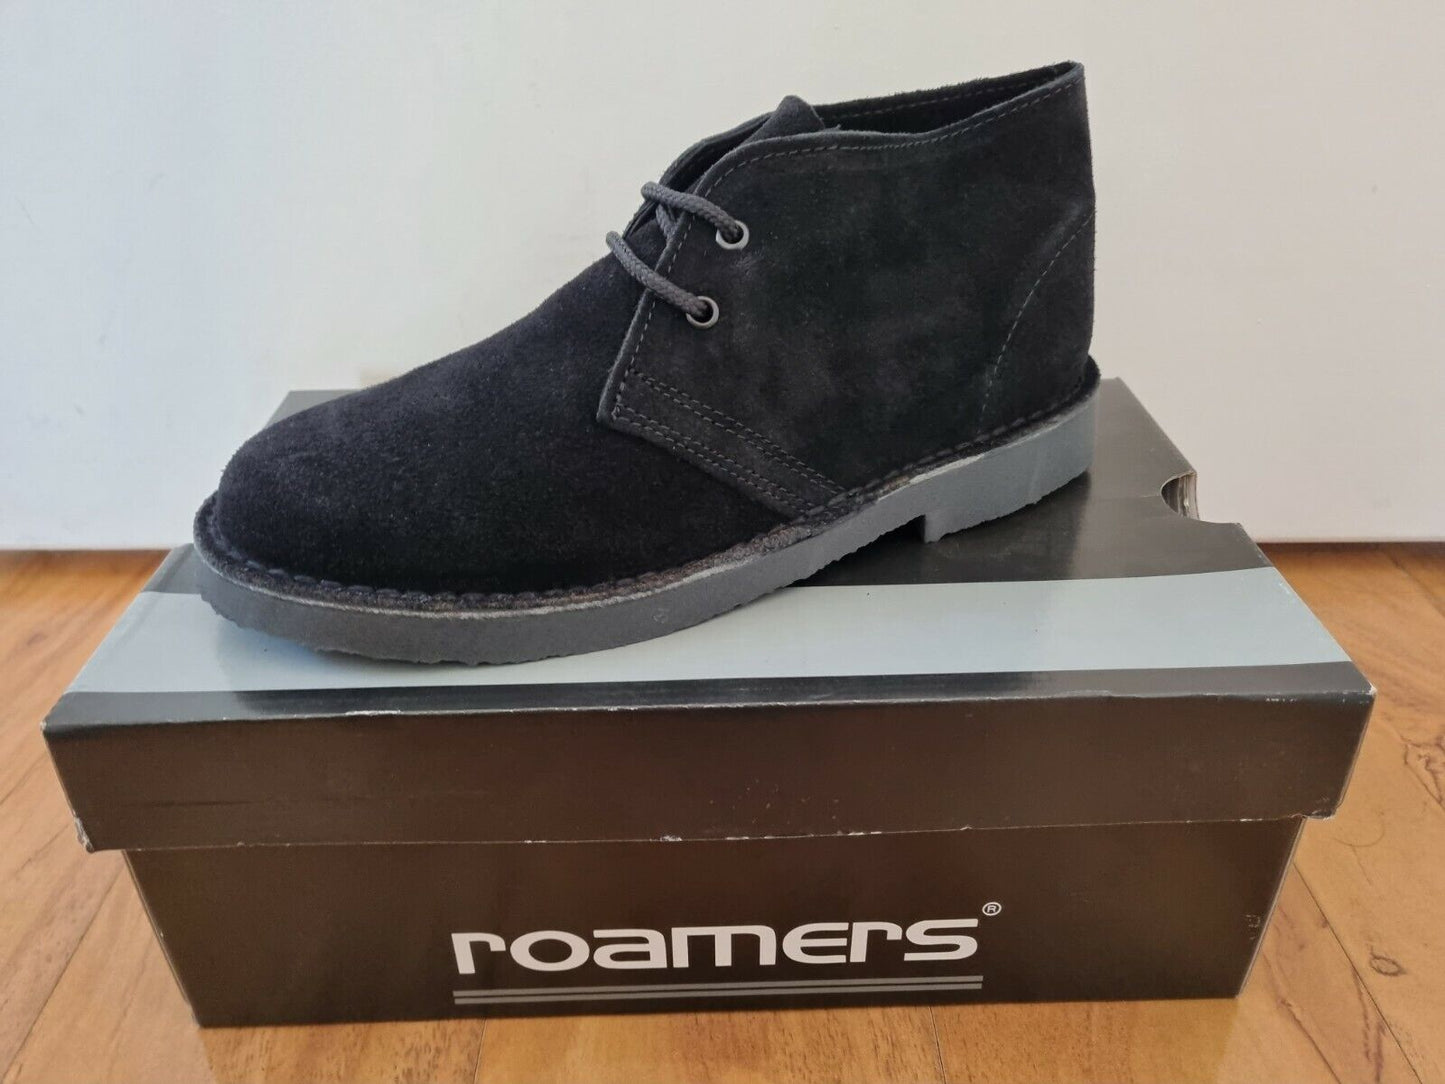 Desert Boot by Roamers - 2 Eye Black Suede Leather (M467AS)